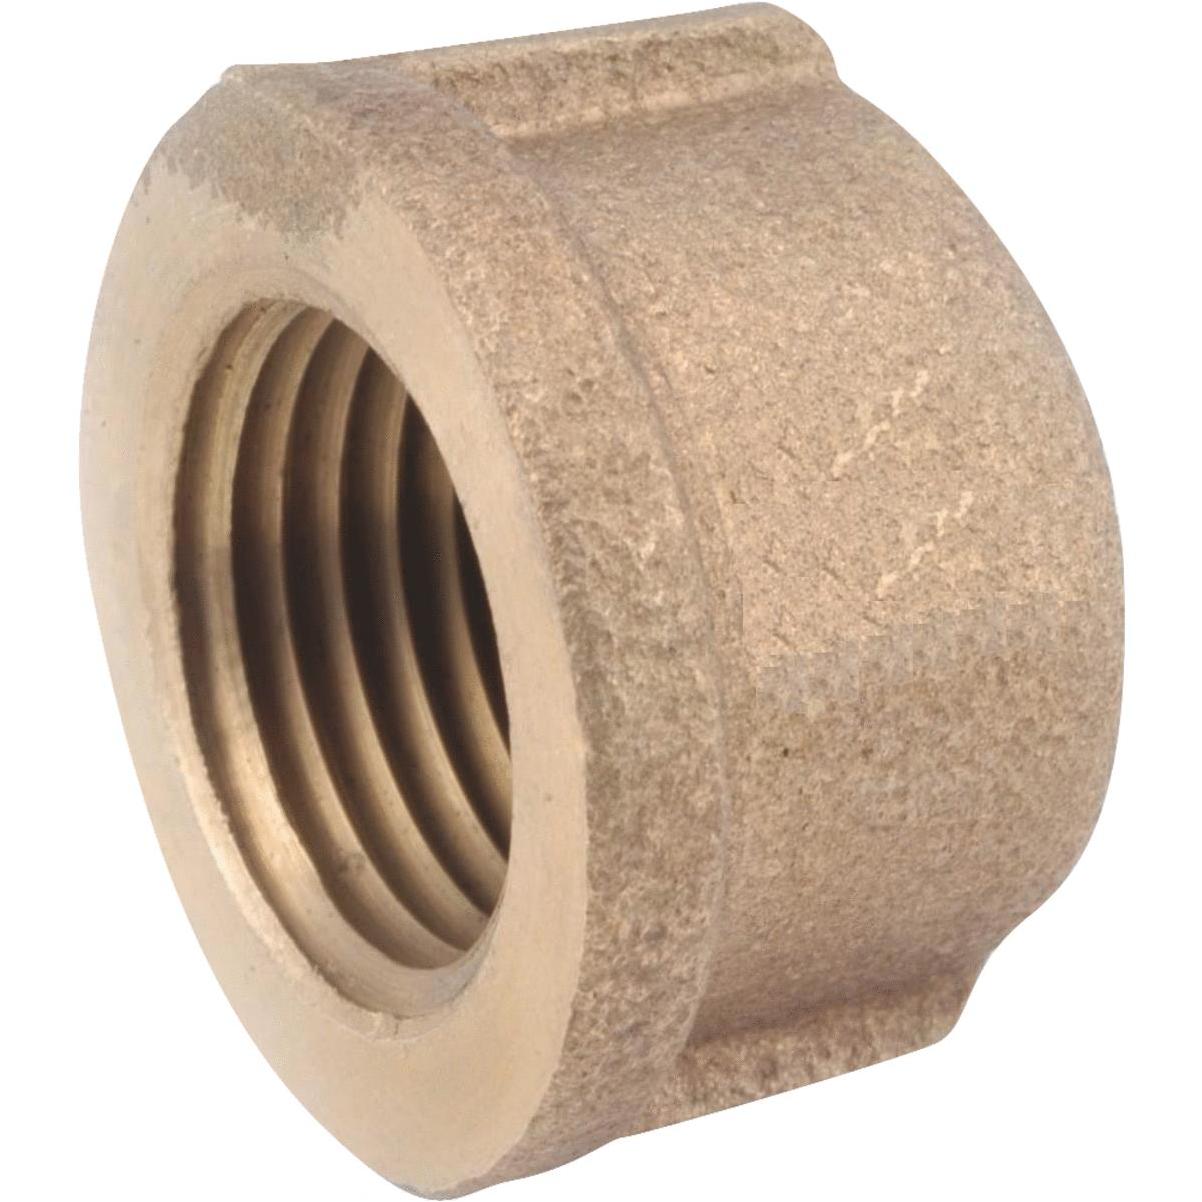 3/8 OD Compression (Lead-Free) Brass 90-degree Elbow Fitting - Simpson  Advanced Chiropractic & Medical Center